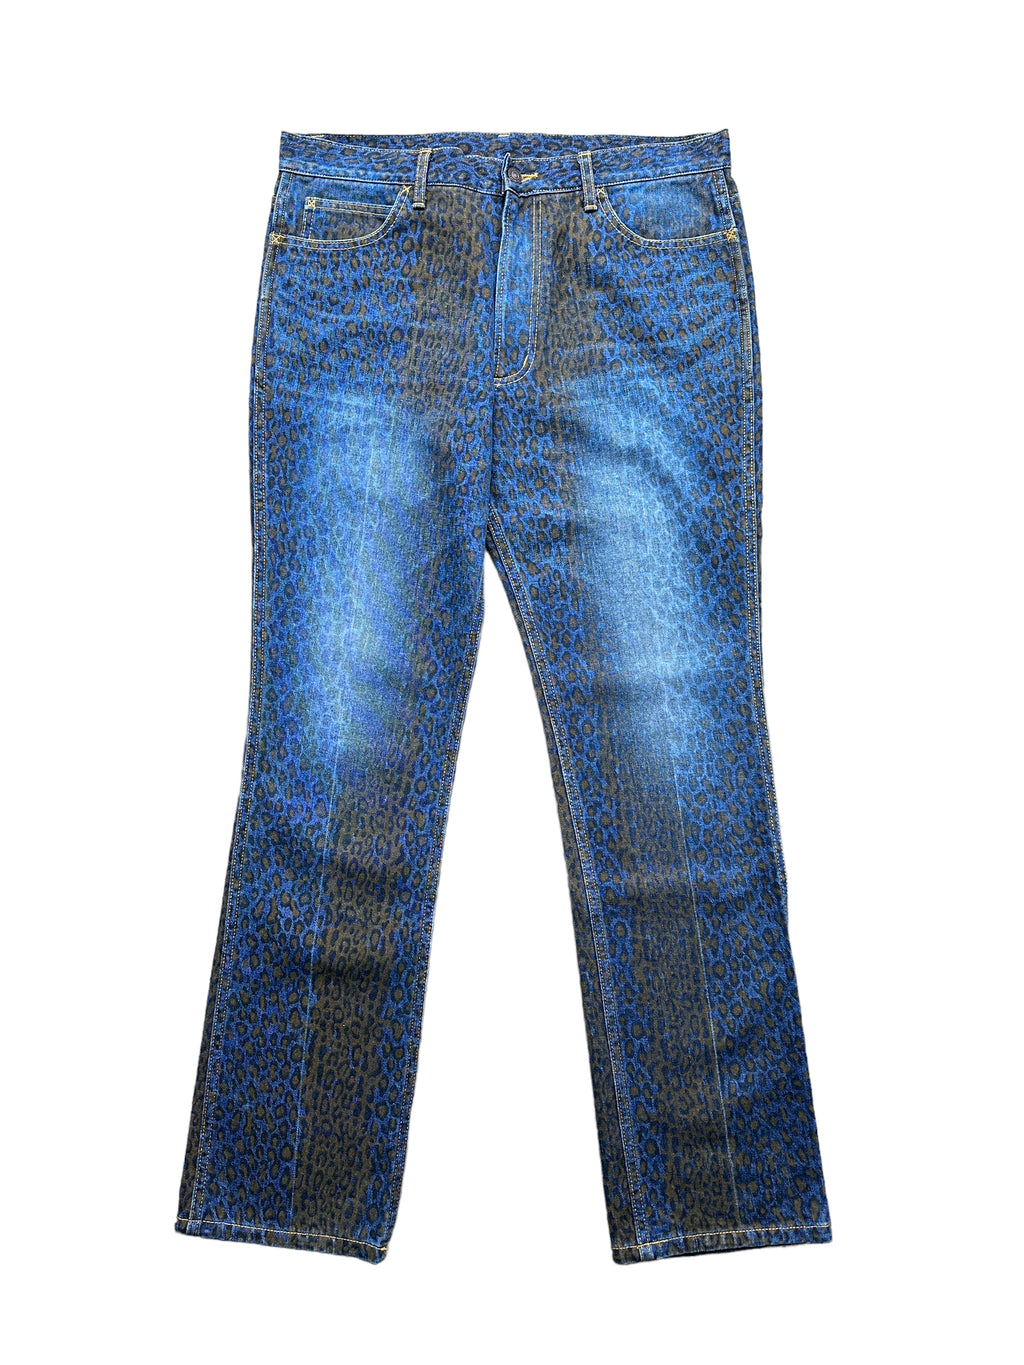 Nepenthes jeans 36/32